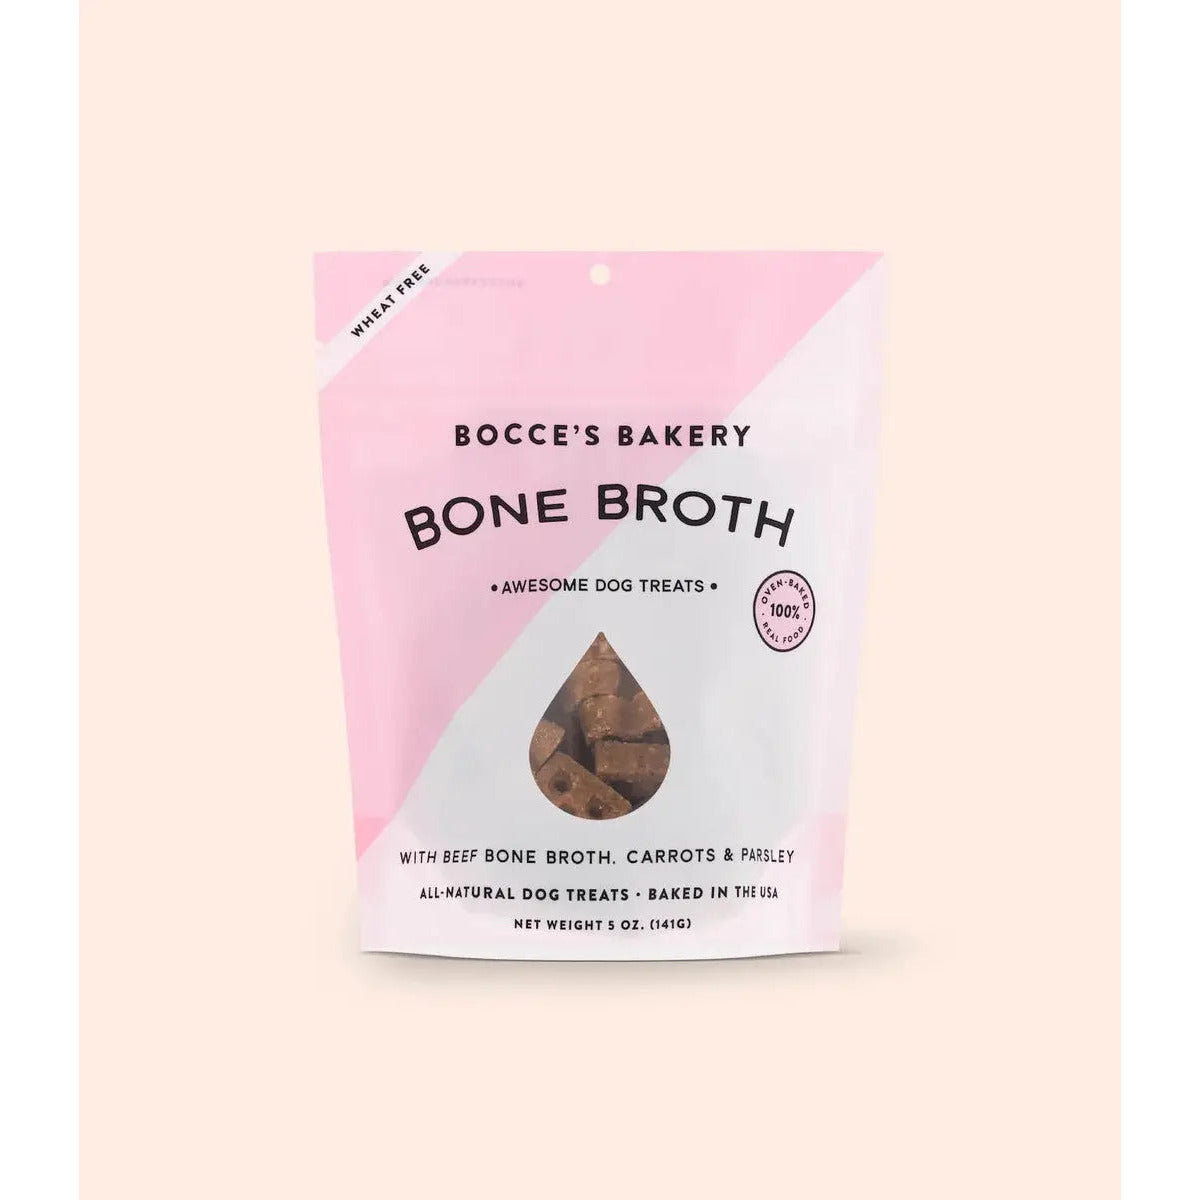 Bocce's Bakery Bone Broth 5oz Biscuits Dog Treats Bocce's Bakery